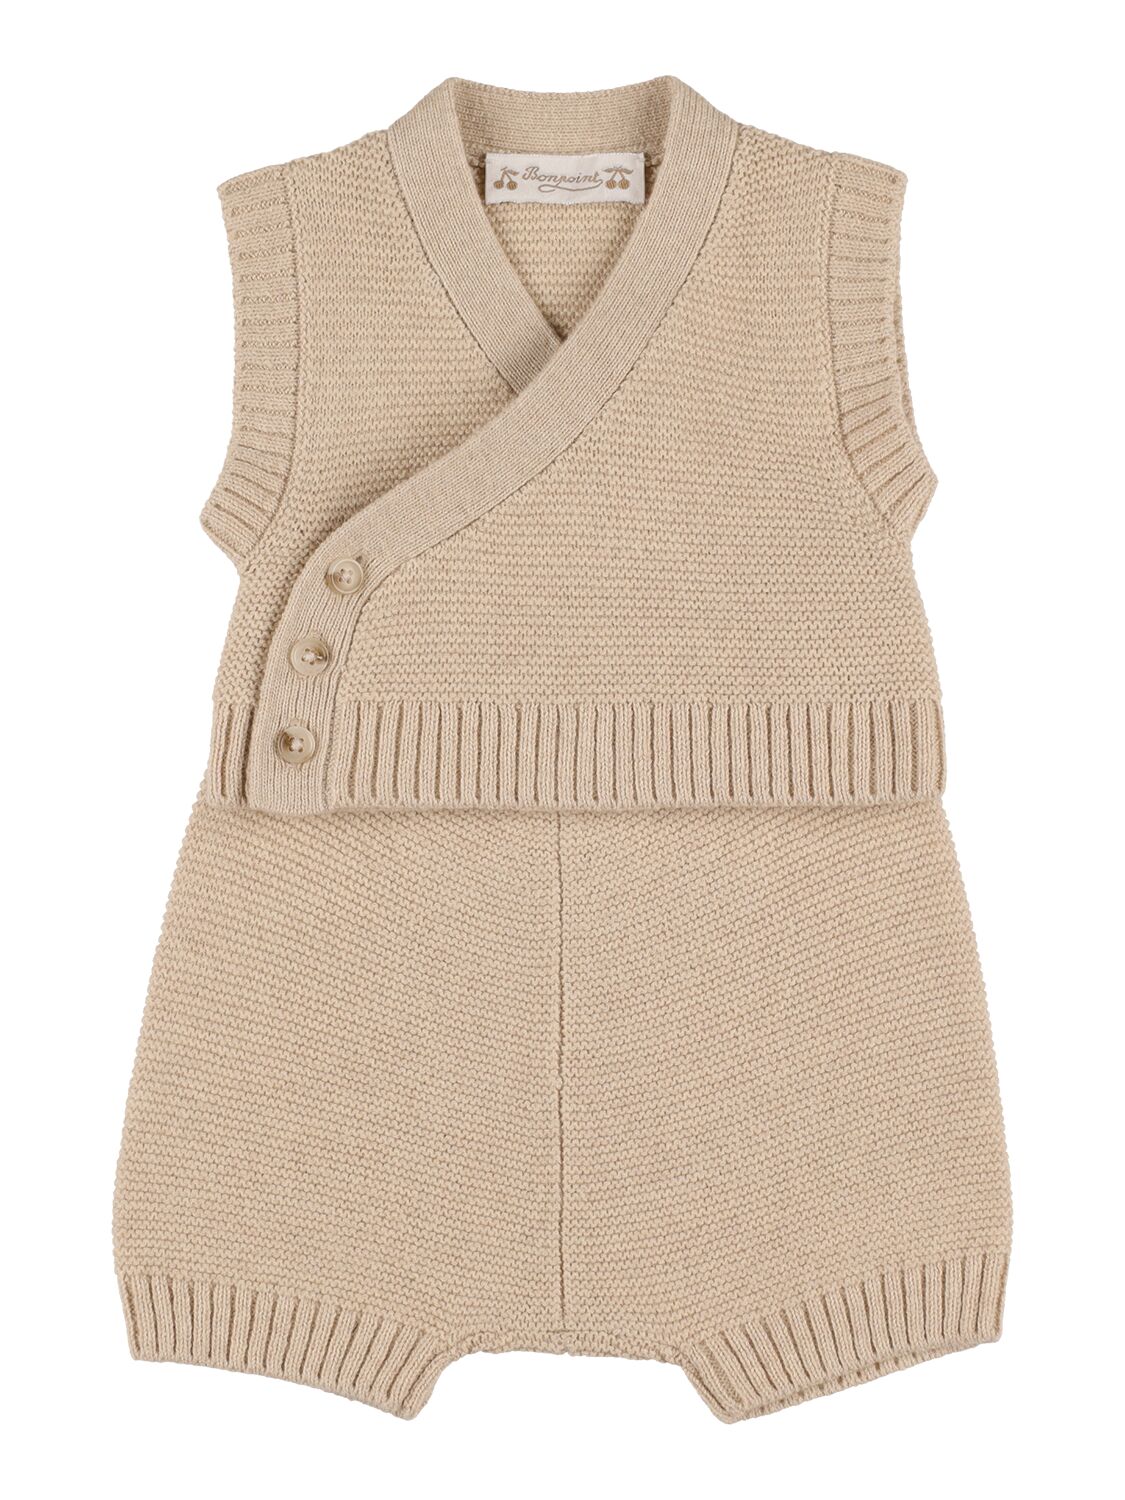 Bonpoint Babies' Cotton & Wool Tricot Cardigan & Shorts In 베이지